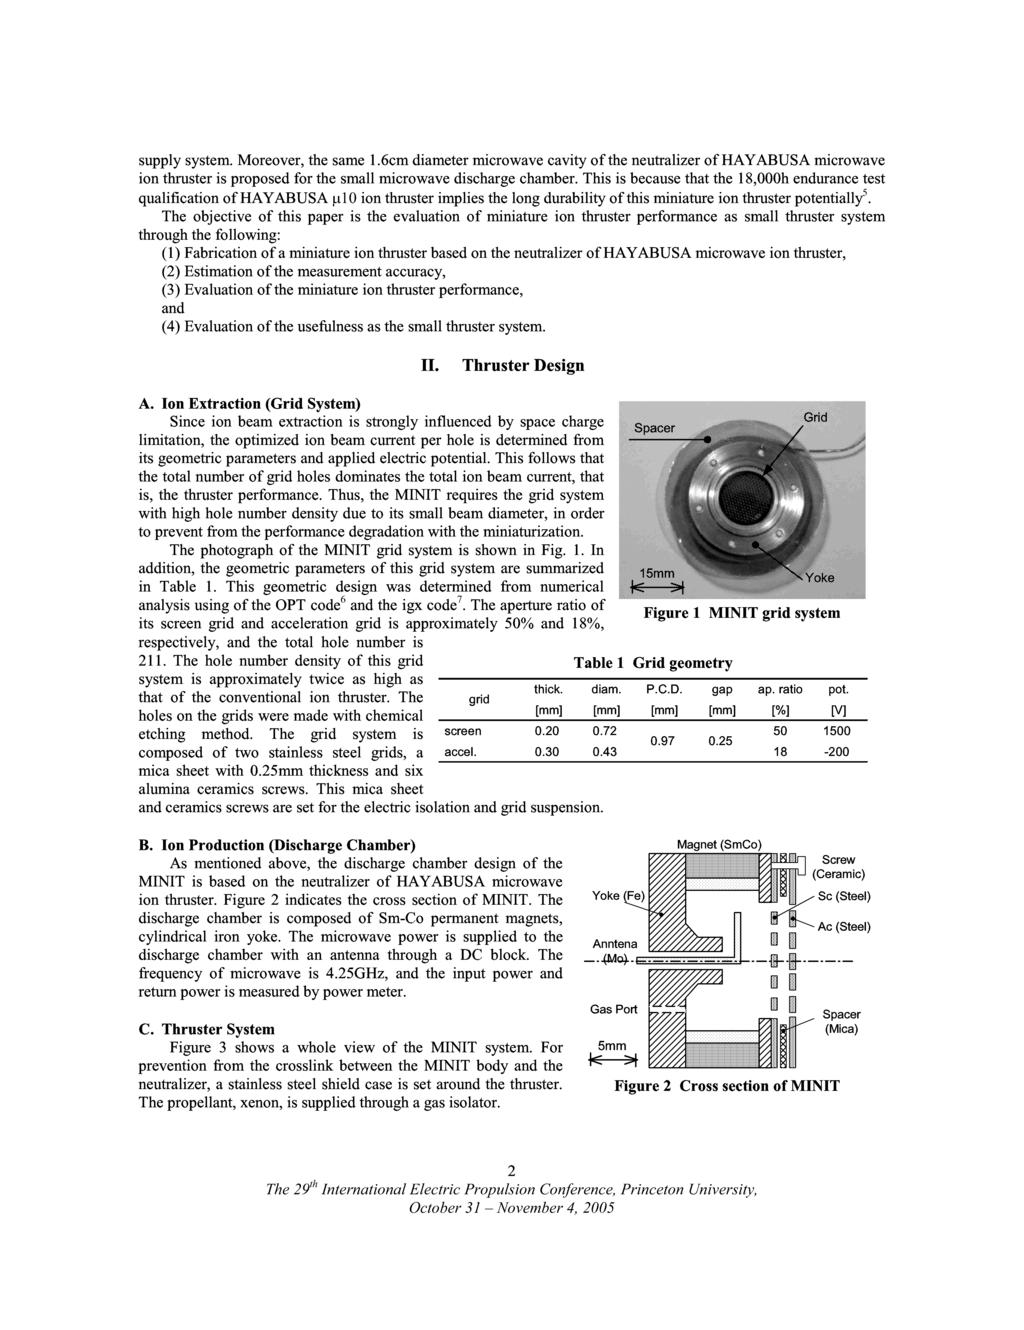 supply system. Moreover, the same 1.6cm diameter microwave cavity of the neutralizer of HAYABUSA microwave ion thruster is proposed for the small microwave discharge chamber.